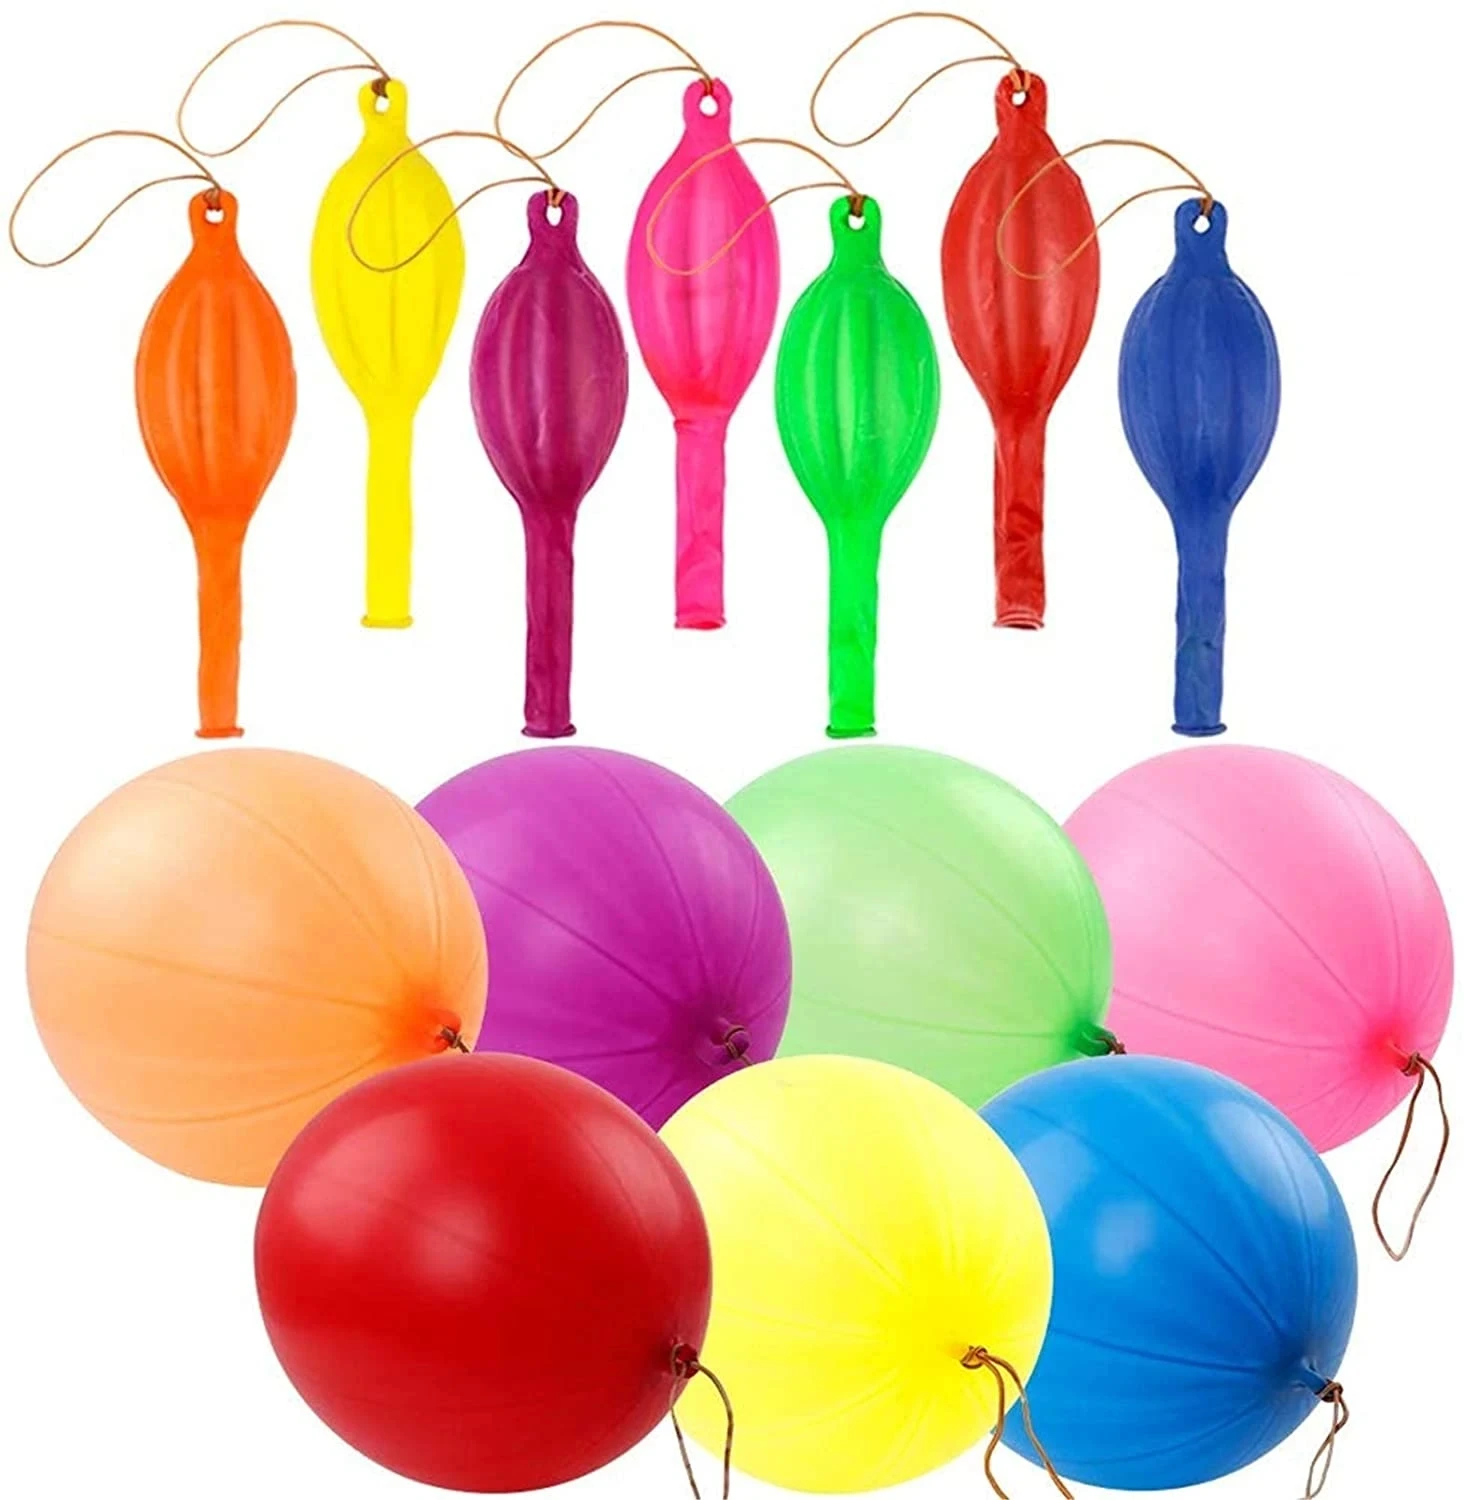 50PCS Large Punch Ball Balloons Assorted Colors Party Bag Fillers UK Stock 